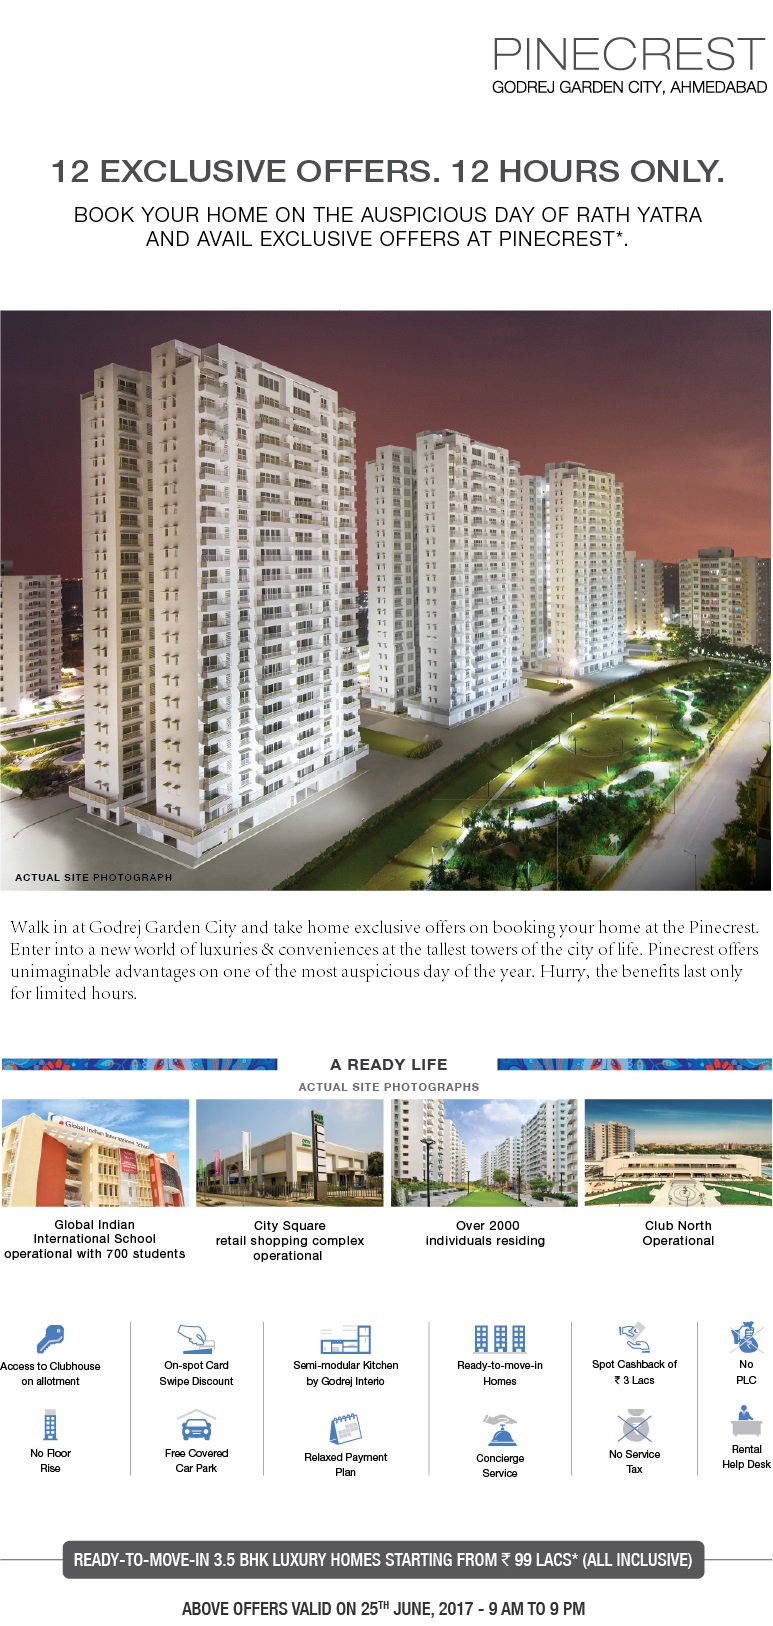 Walk in at Godrej Garden City and take home exclusive offers on booking your home at the Pinecrest Update